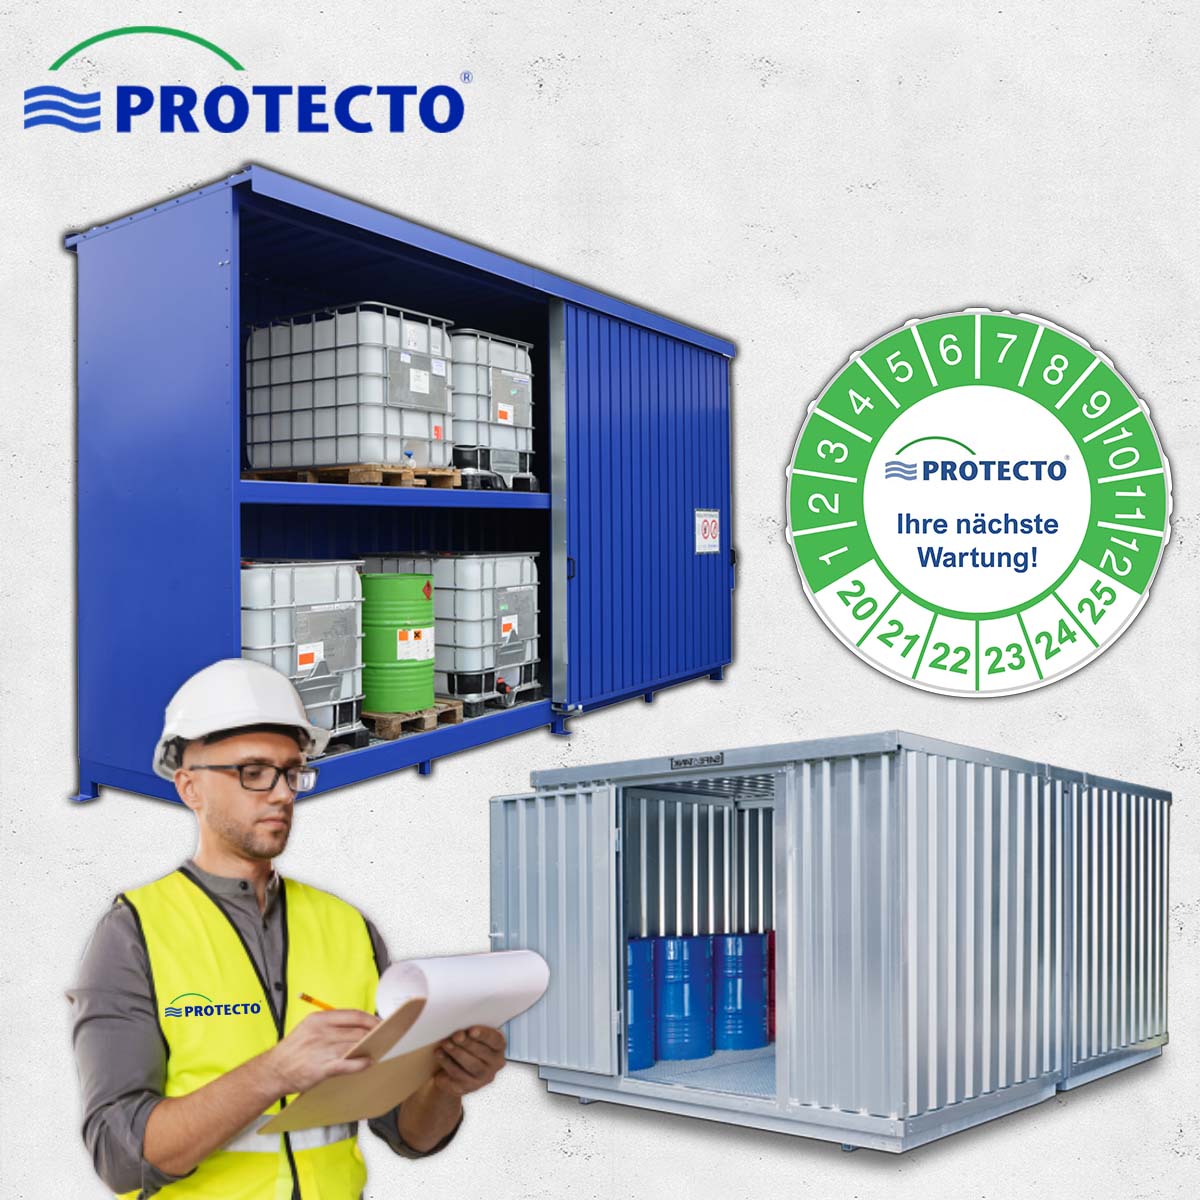 wartung-whg-lager-gefahrstoffcontainer-protecto23rKhAy95nftV